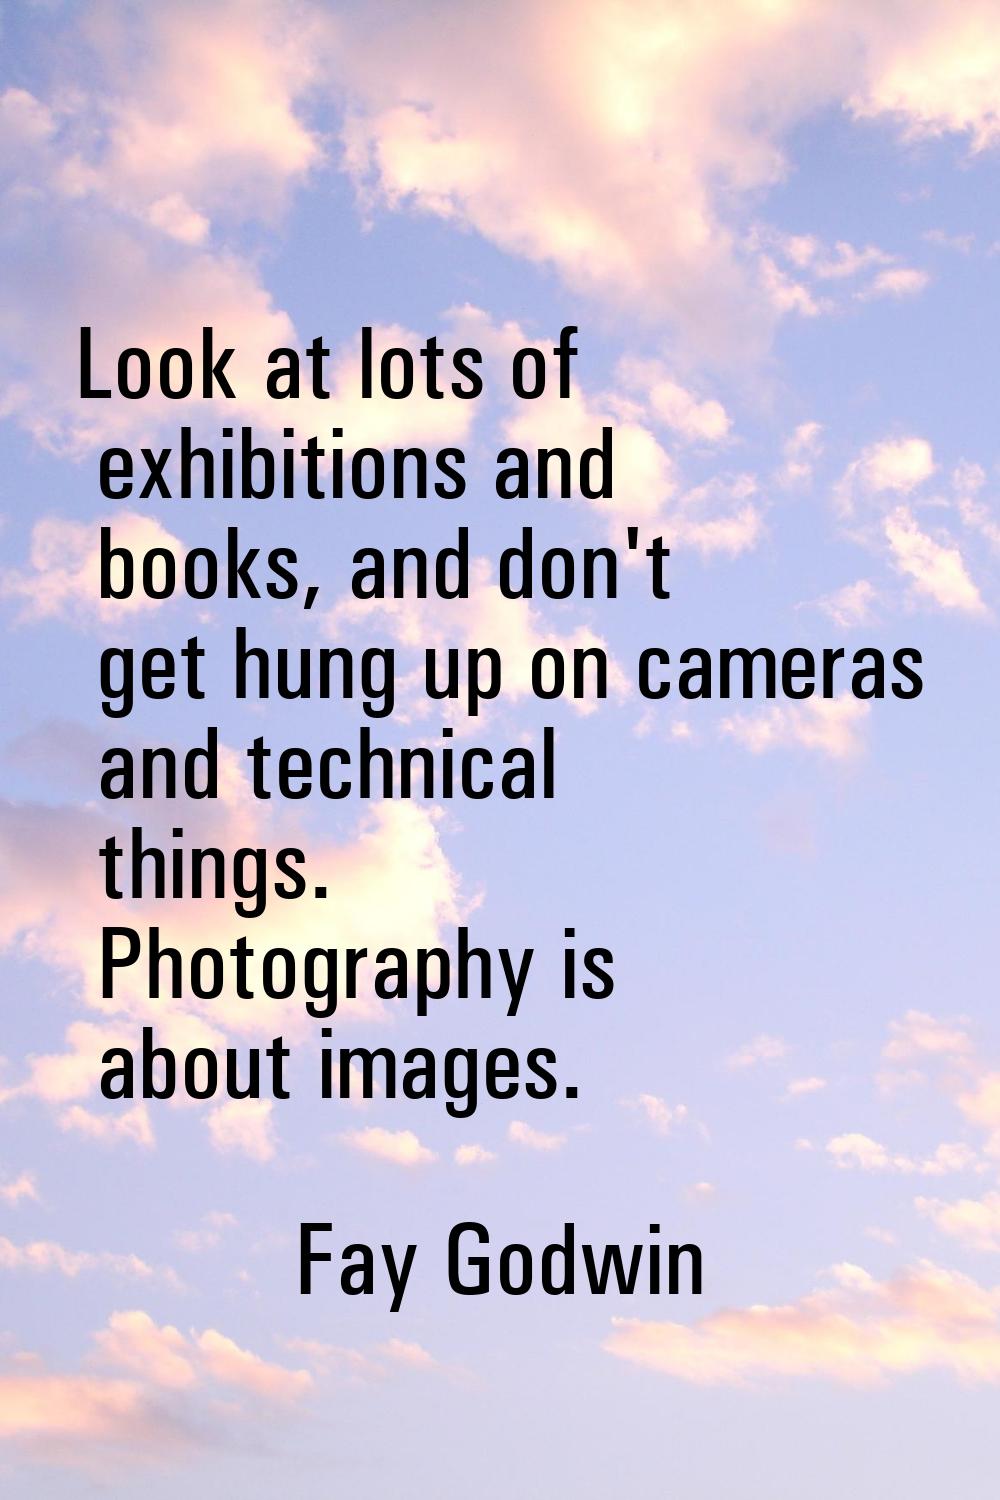 Look at lots of exhibitions and books, and don't get hung up on cameras and technical things. Photo